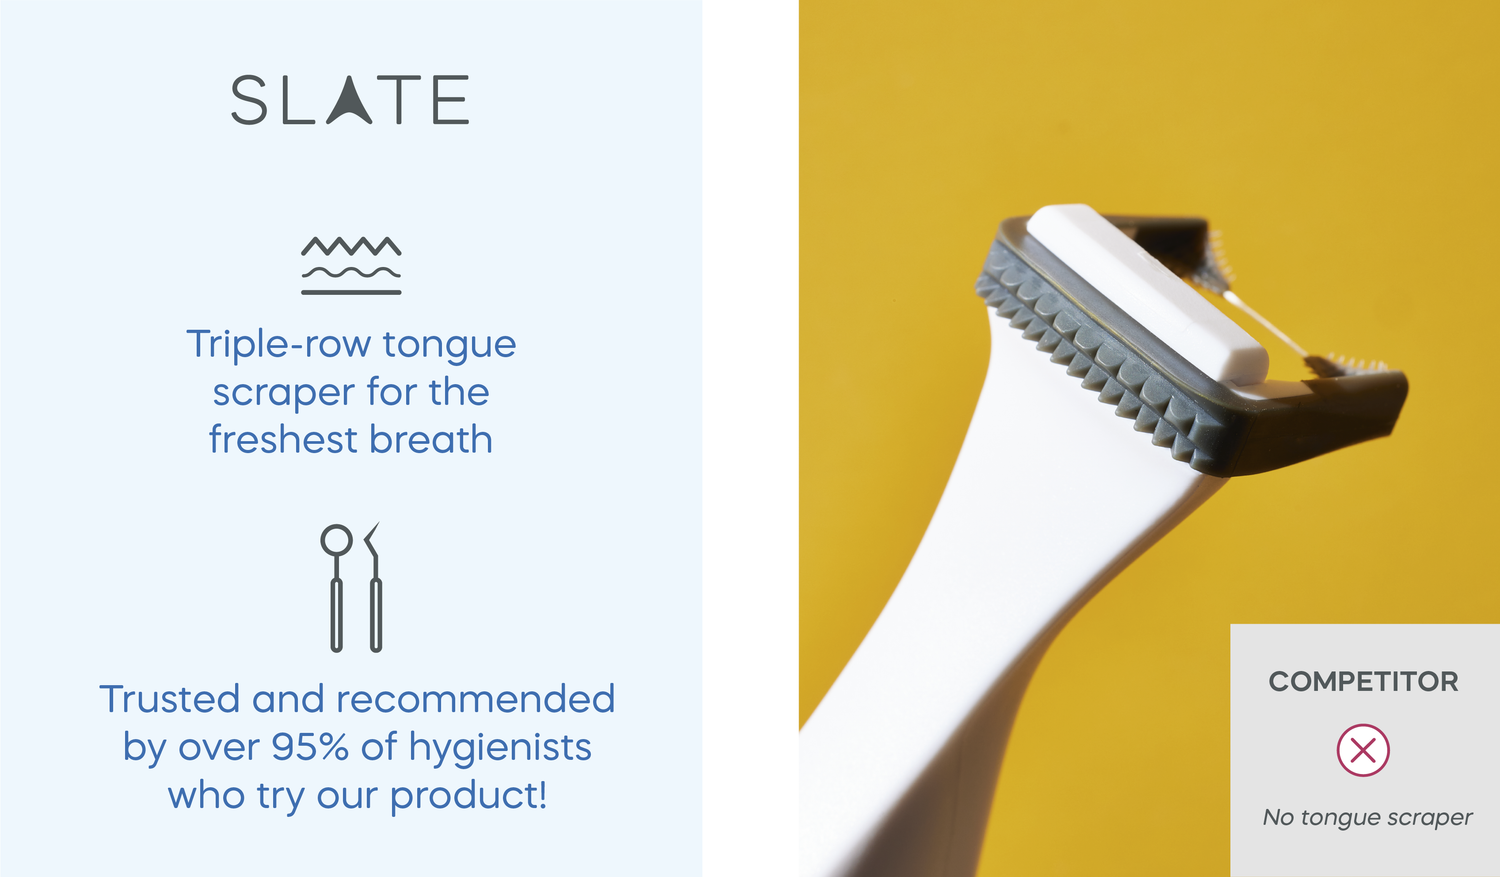 Slate is the only 3-in-1 electric flosser with a tongue scraper trusted and recommended by over 95% of hygienists who try it!